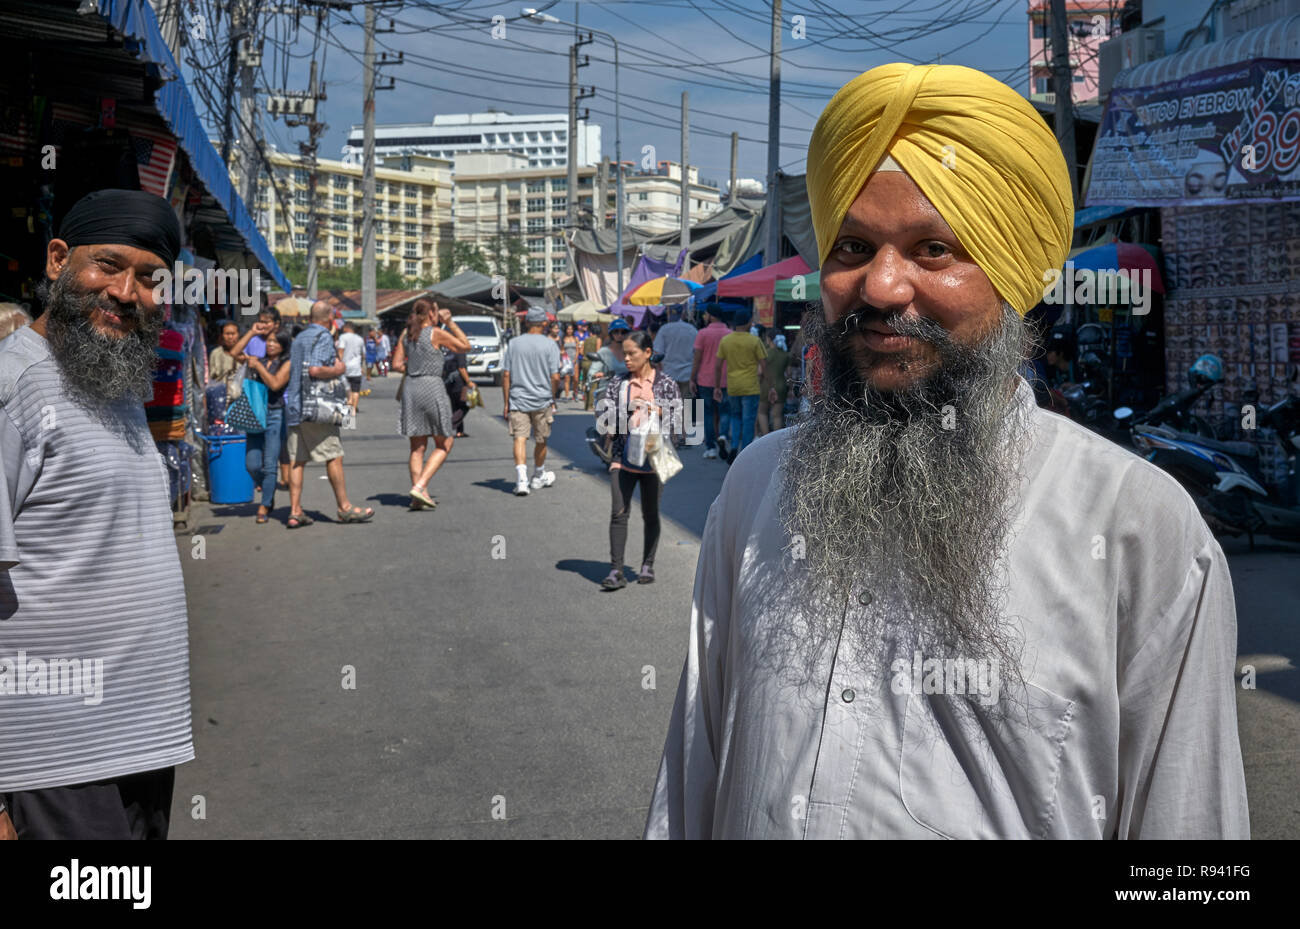 Indian Sikh man in traditional Kurta pajama shirt and turban headwear against his western attired counterpart - modern versus traditional Stock Photo